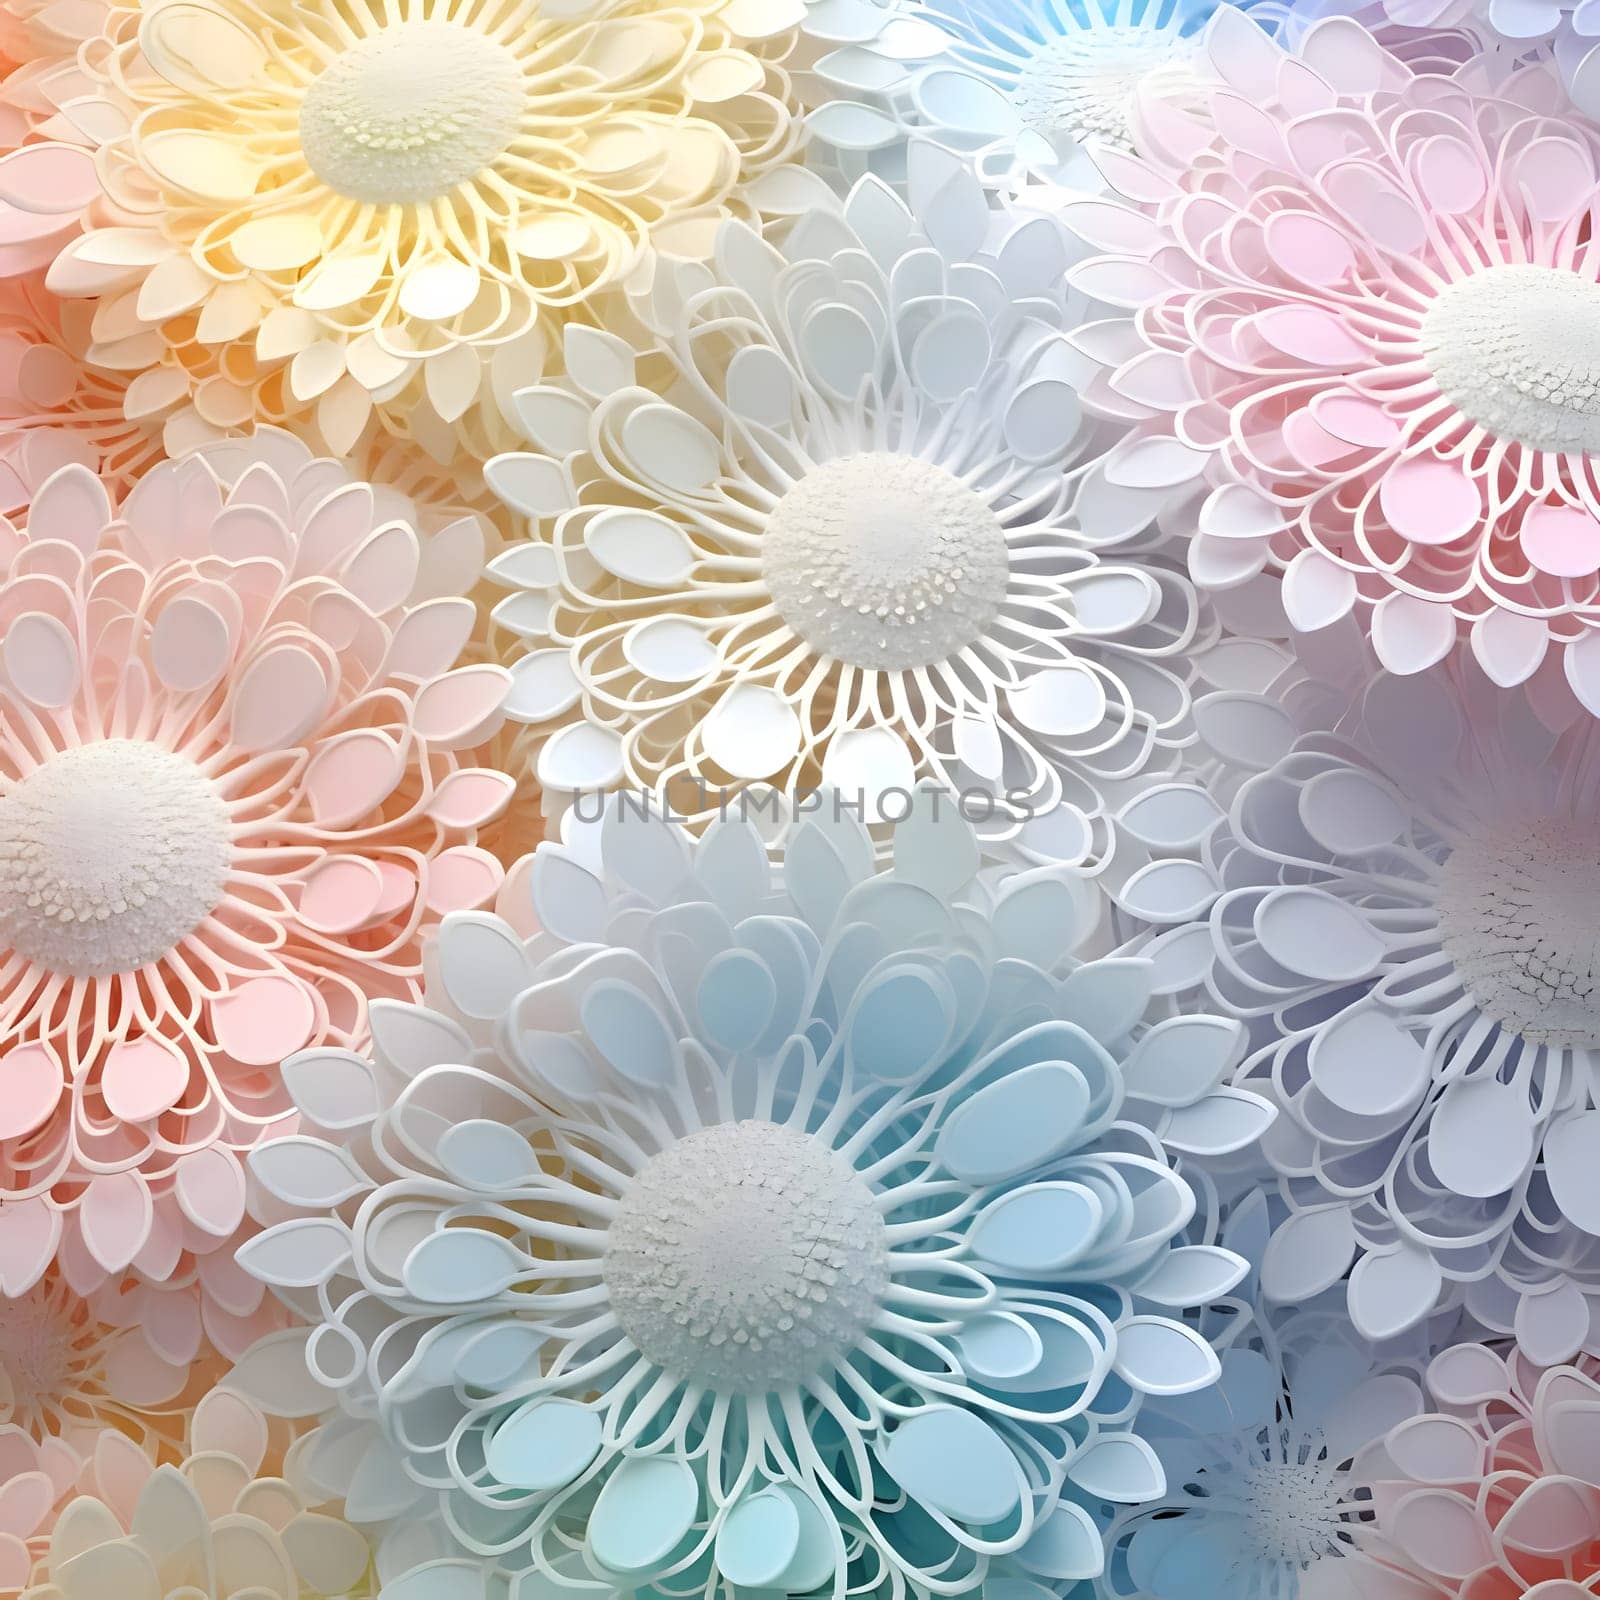 Patterns and banners backgrounds: Abstract floral background with flowers in pastel colors. Vector illustration.